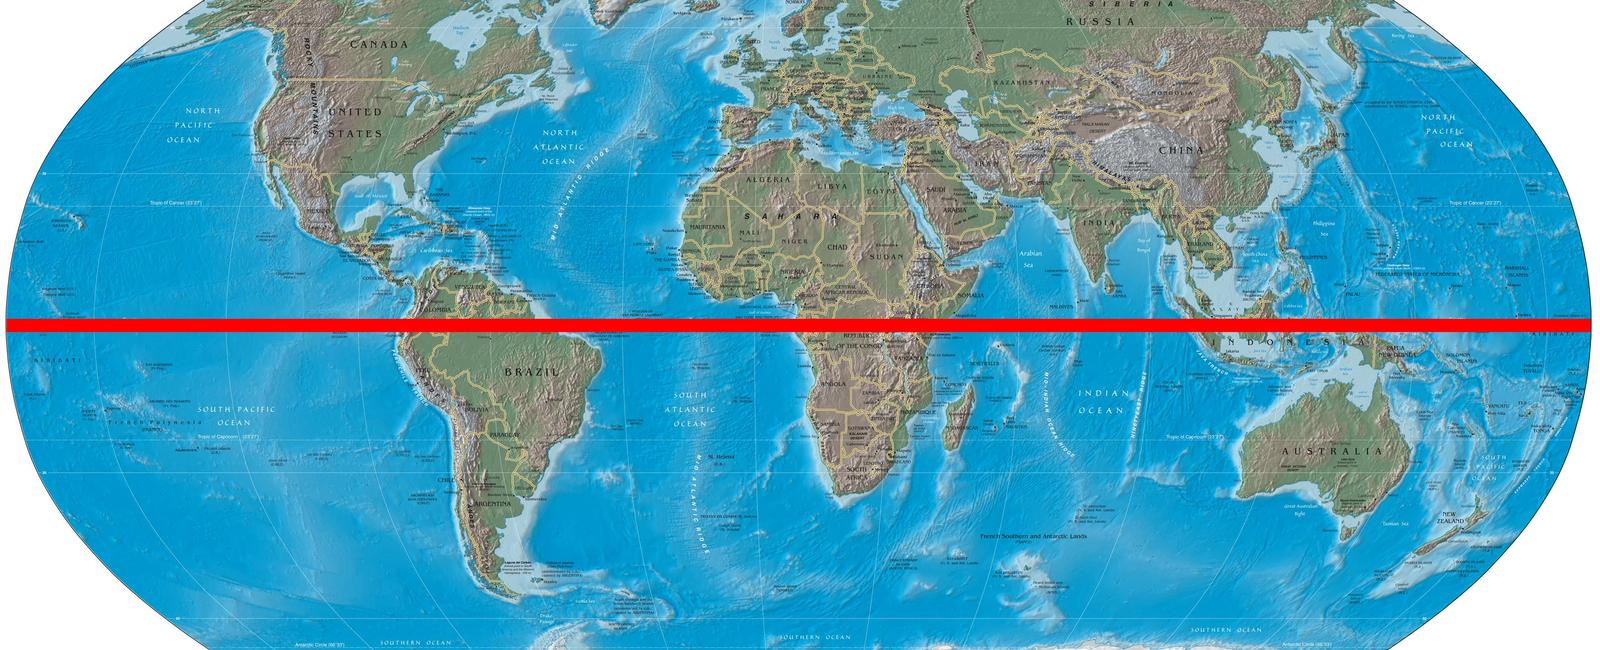 There are 13 countries located along the earth s equator